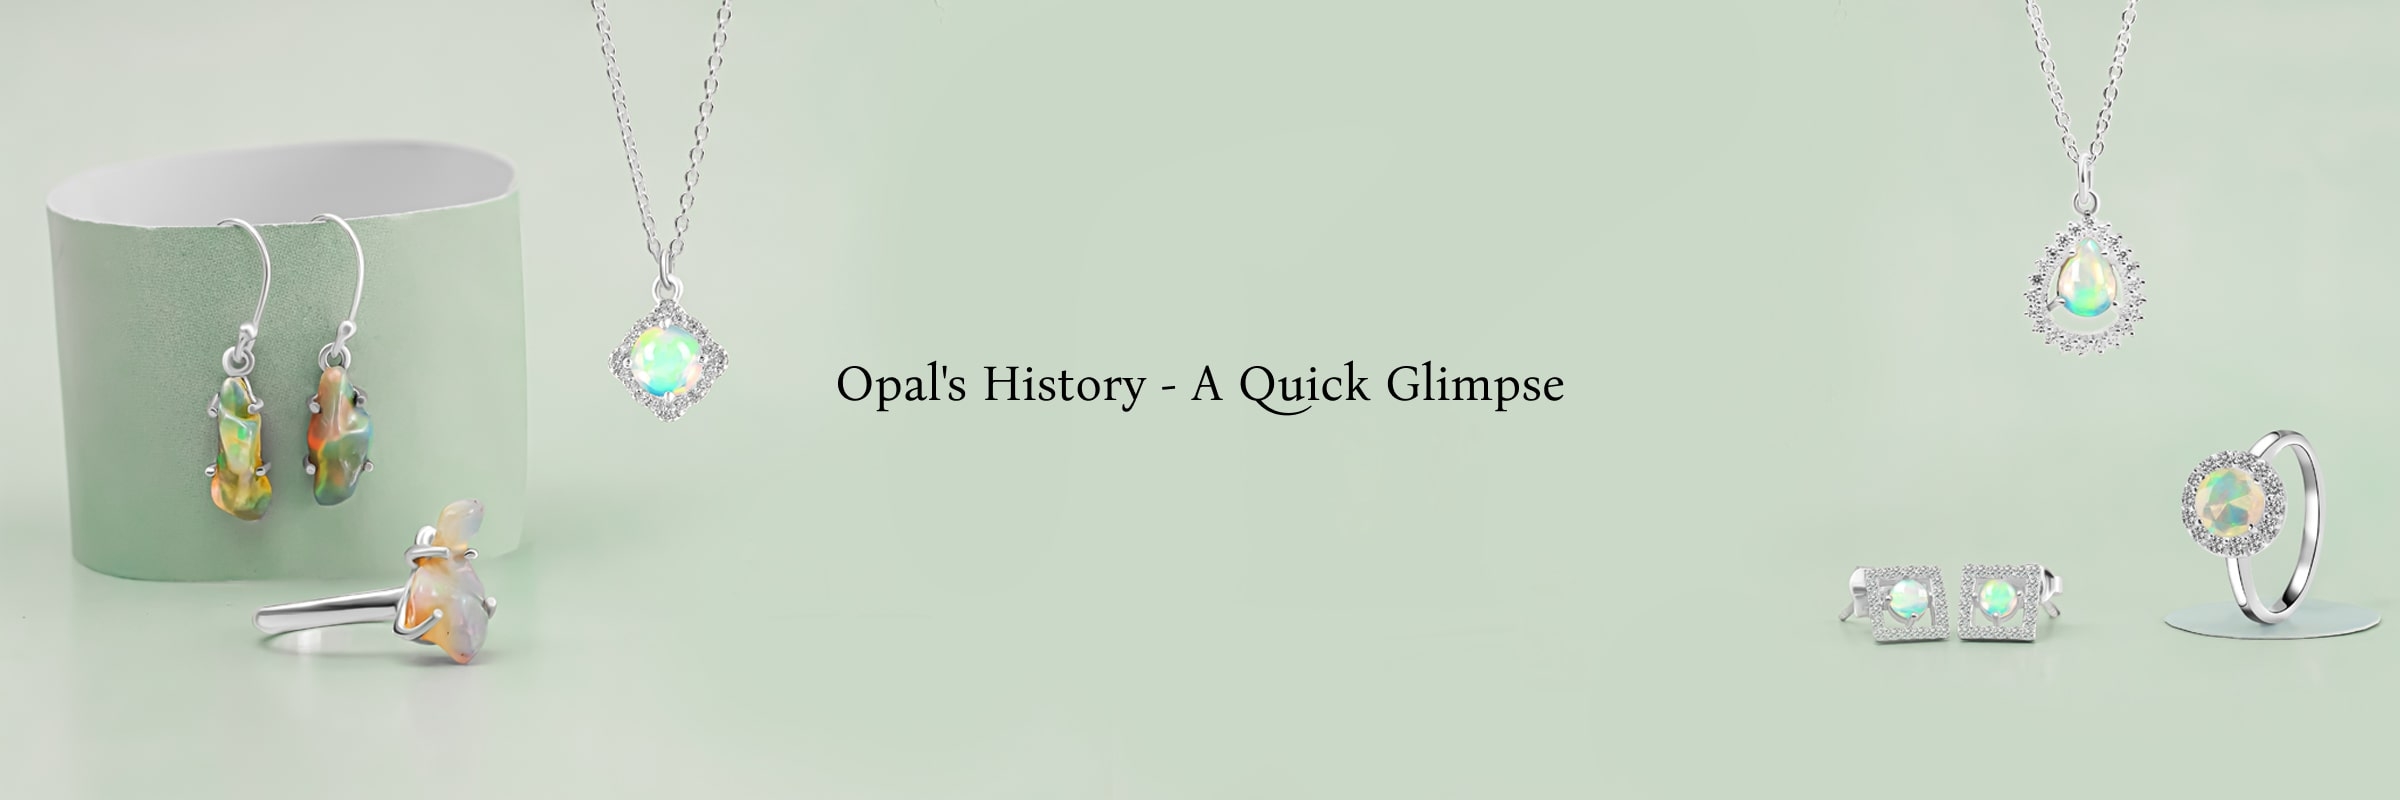 Opals: A Brief Glimpse Back in Time